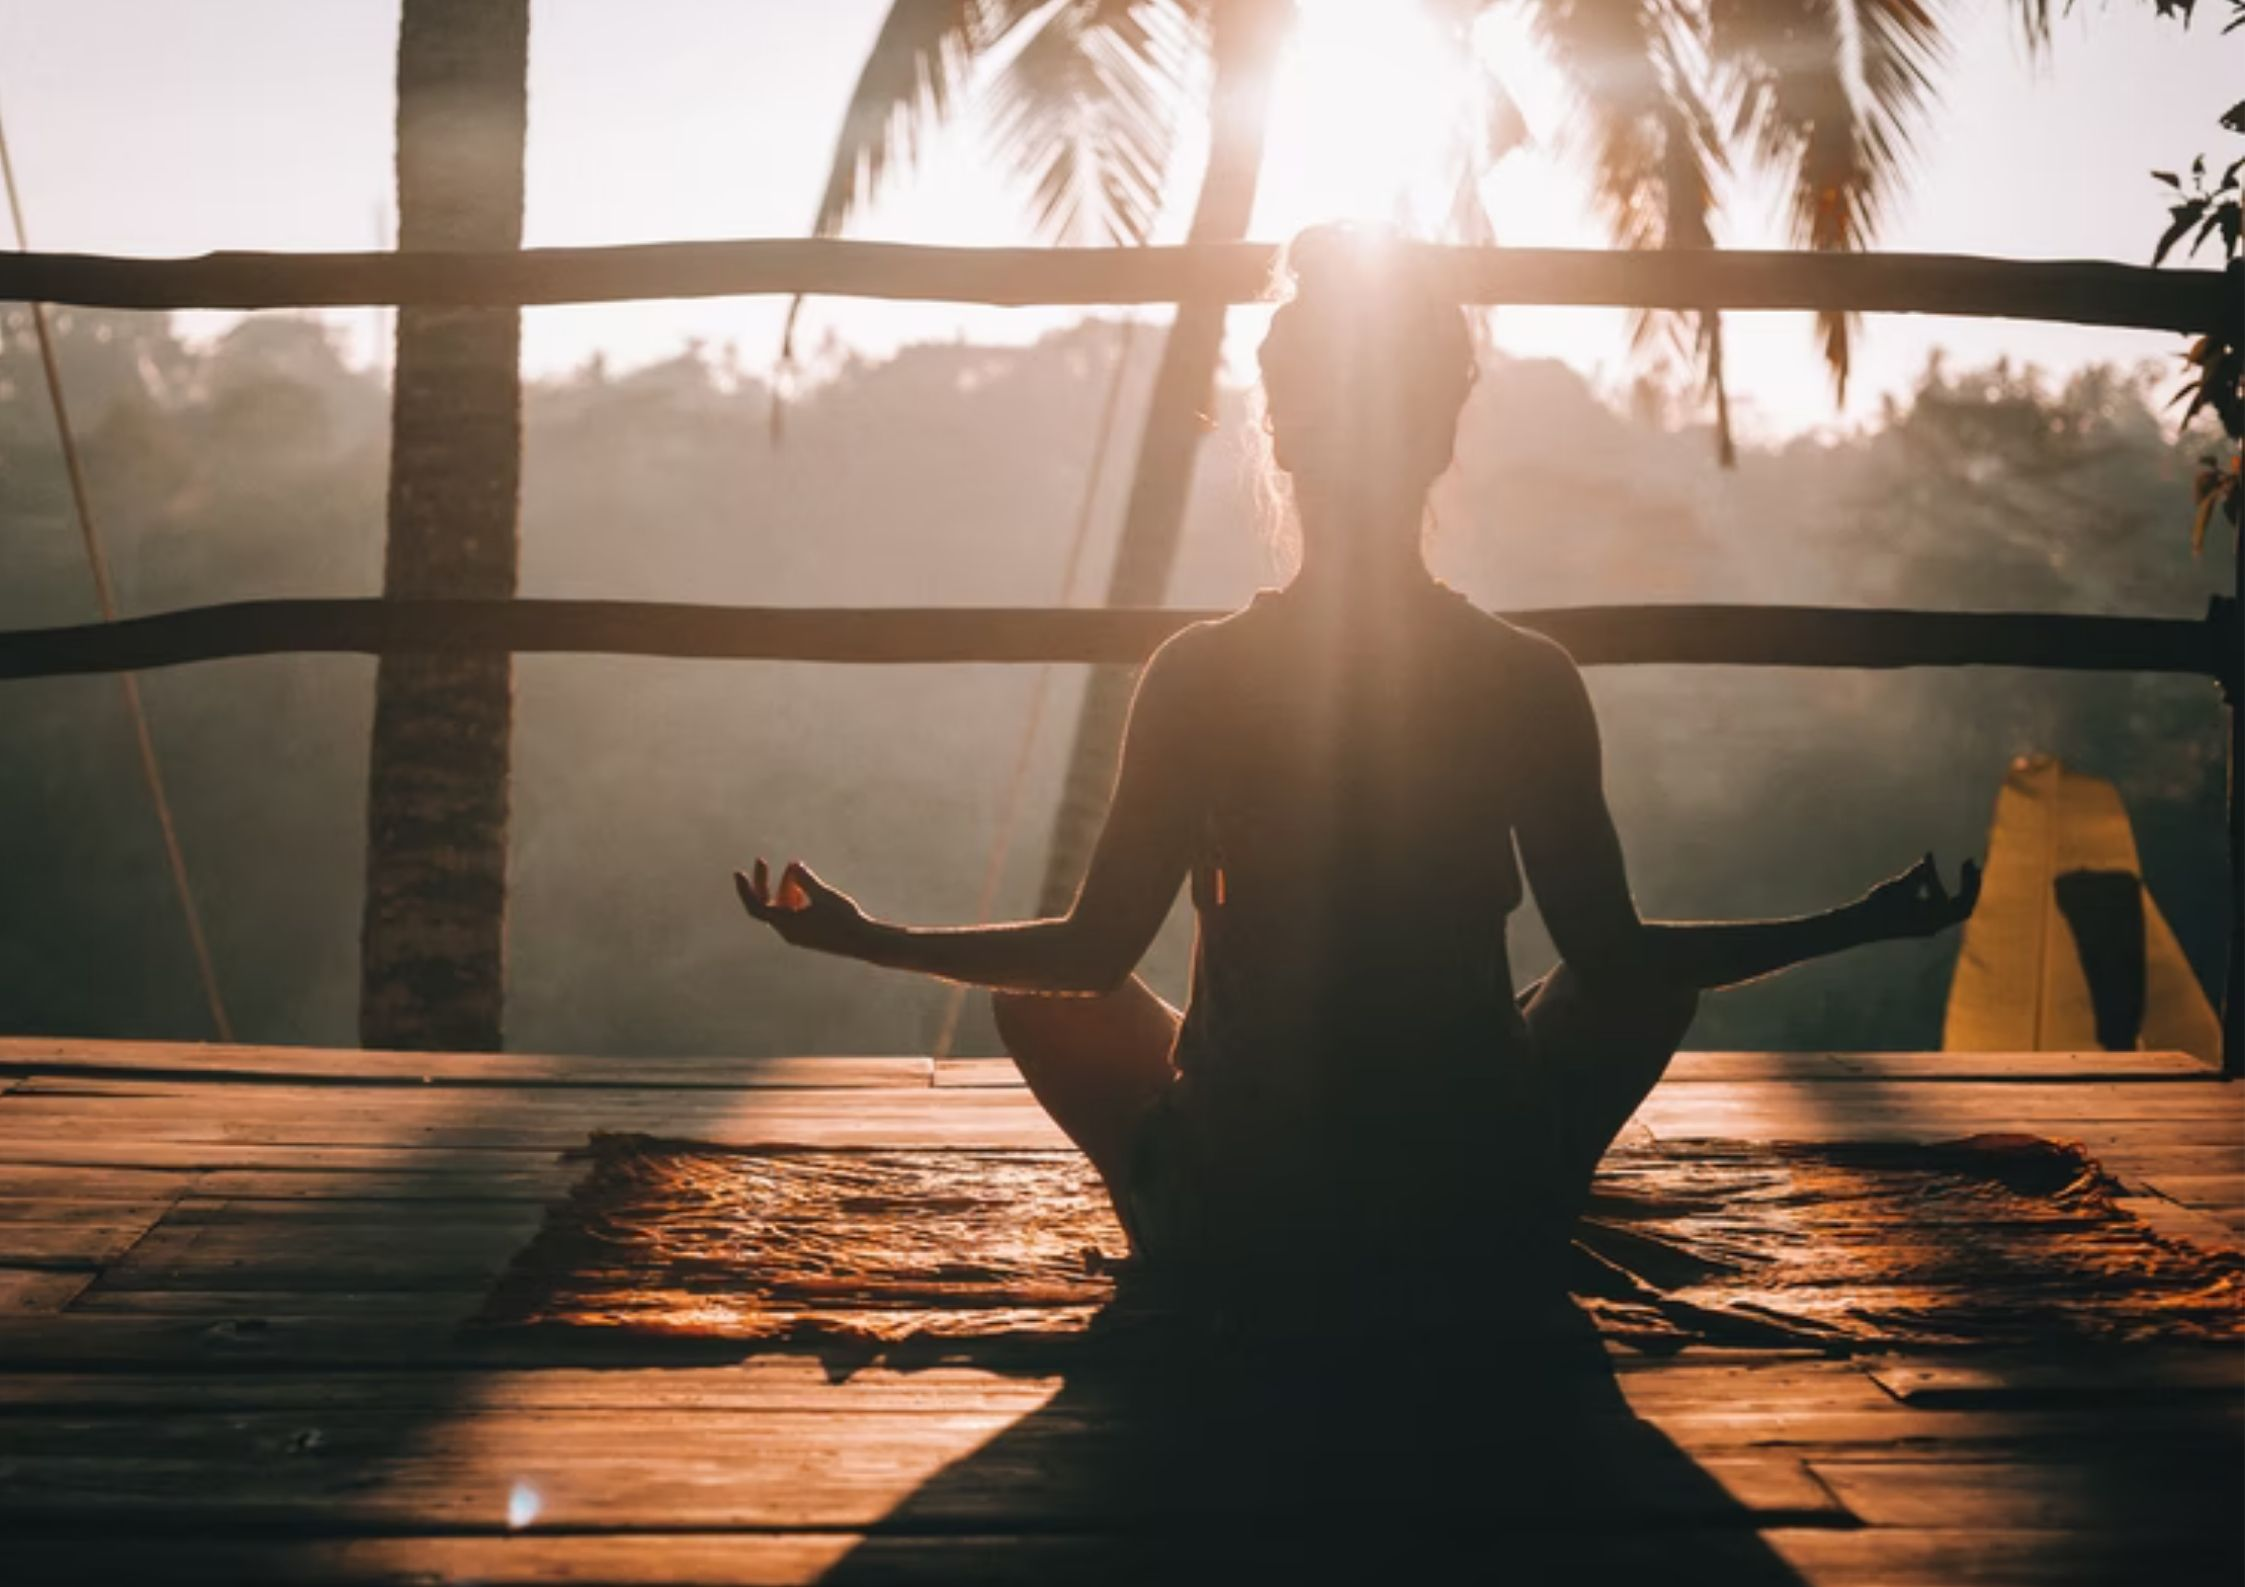 Meditation can help if you lack positive energy